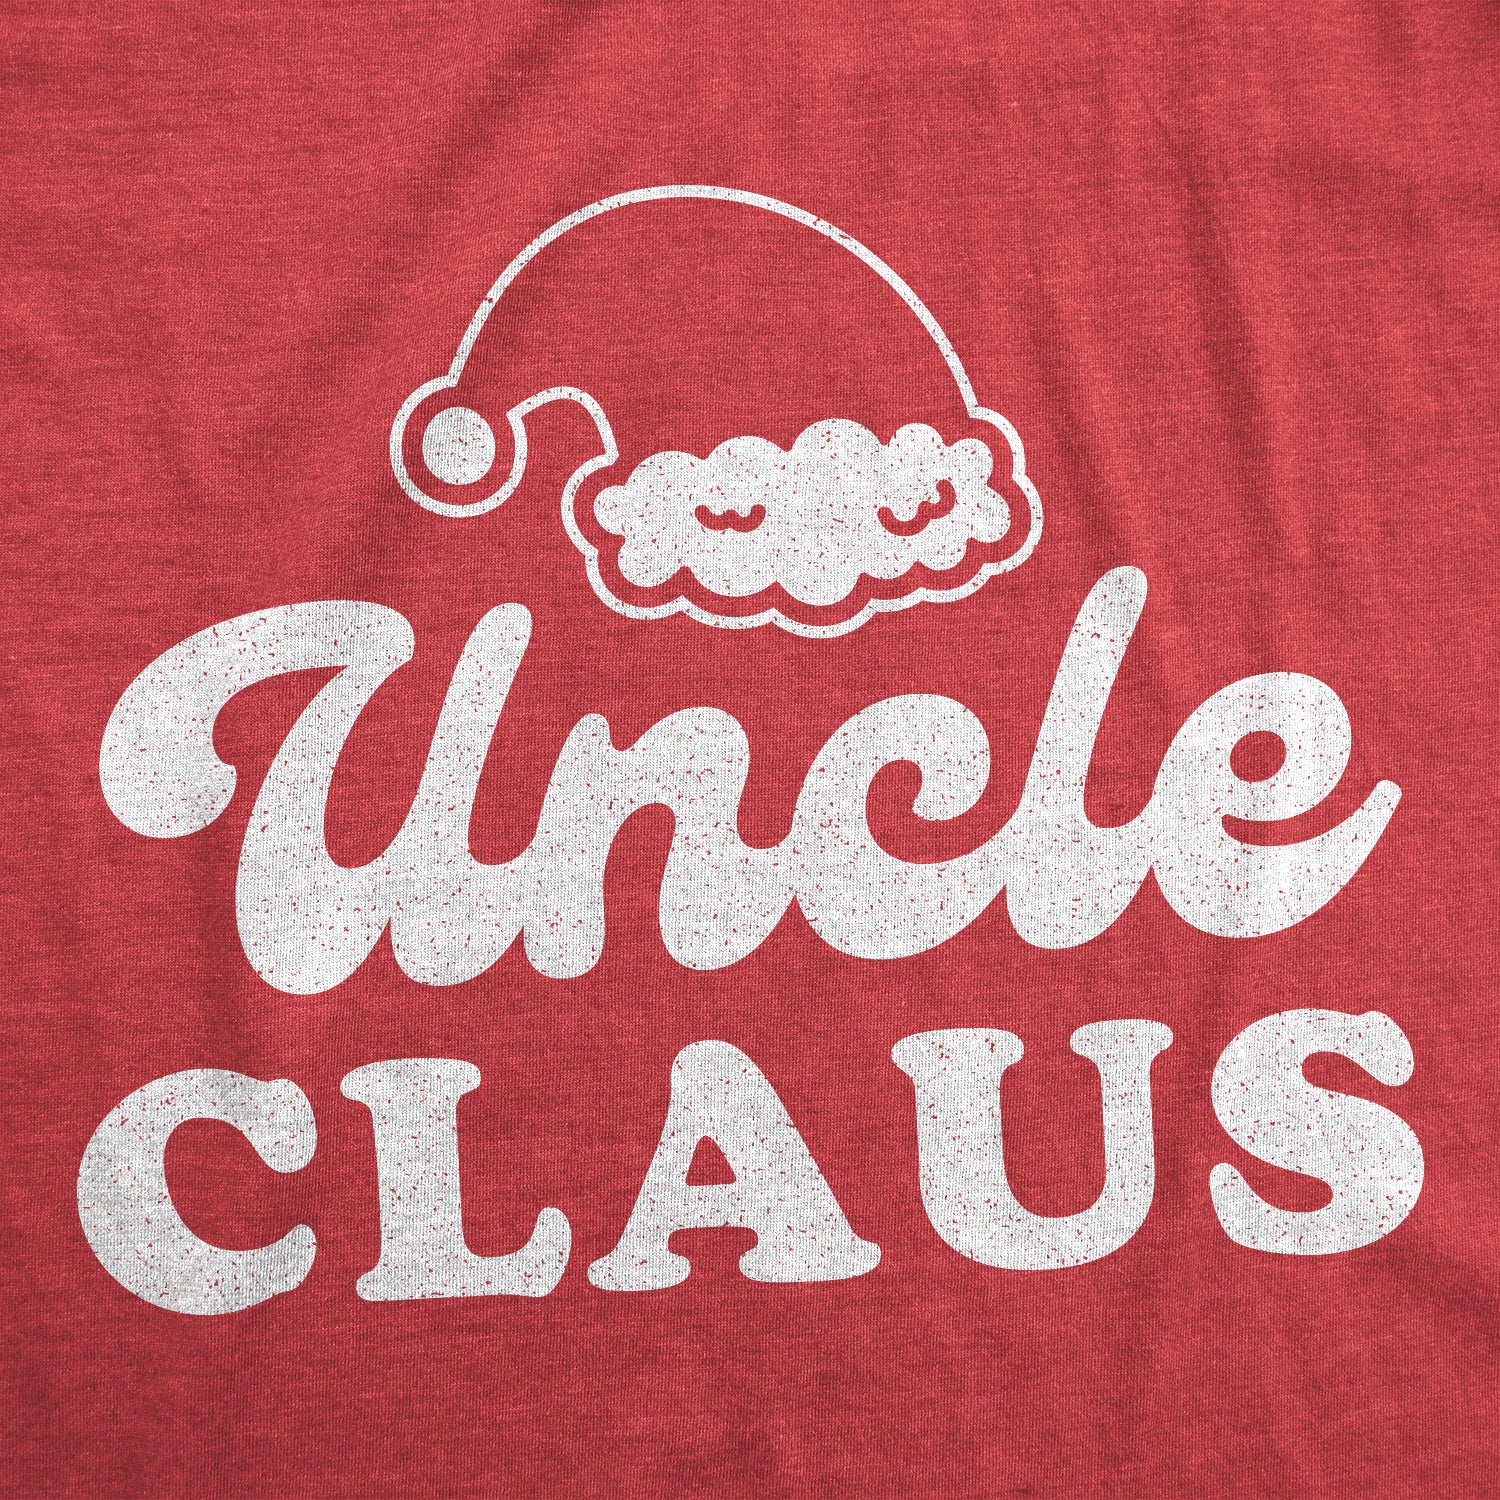 Funny Heather Red - Uncle Uncle Claus Mens T Shirt Nerdy Christmas Tee